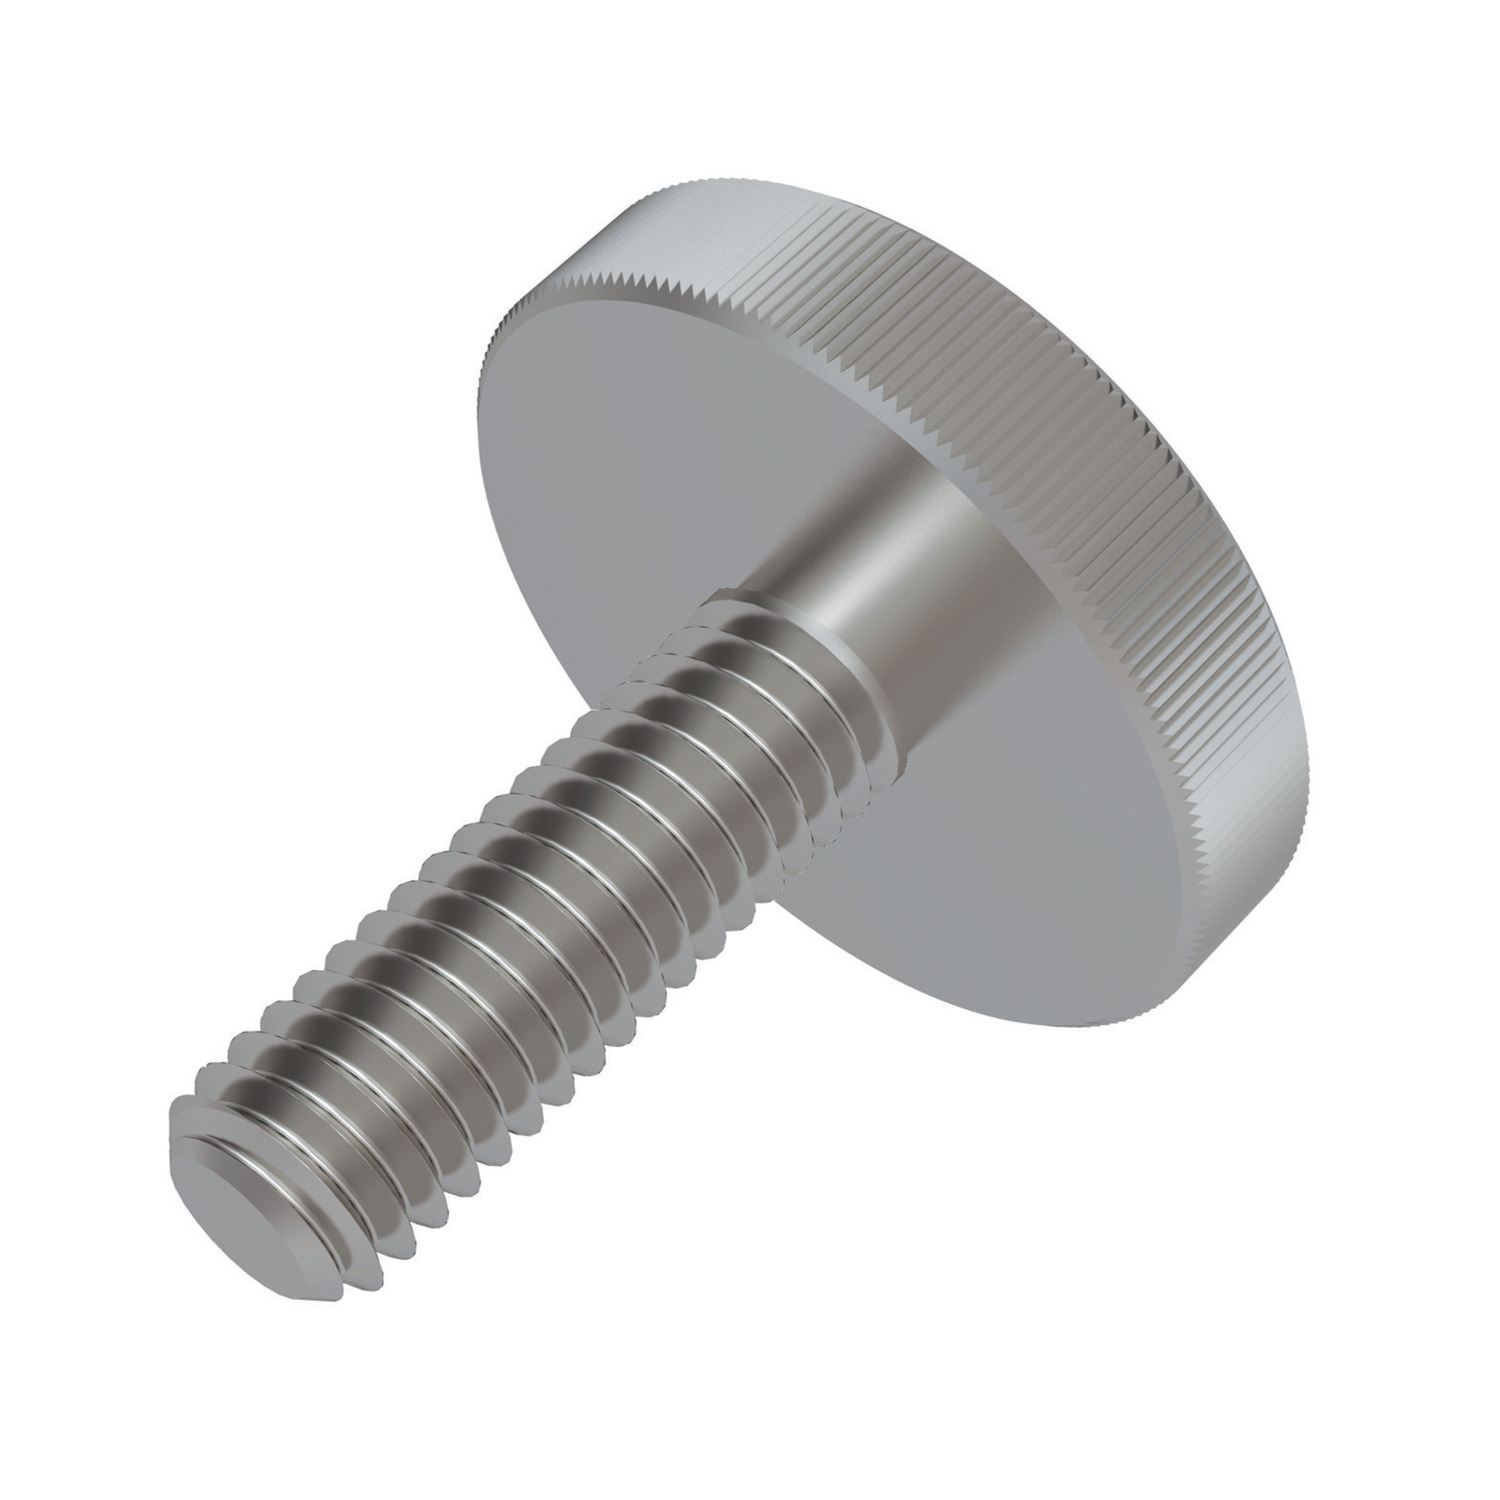 Flat Knurled Thumb Screws Flat Knurled thumb screws manufactured to DIN 653 in steel. Solid one piece construction offers greater strength.